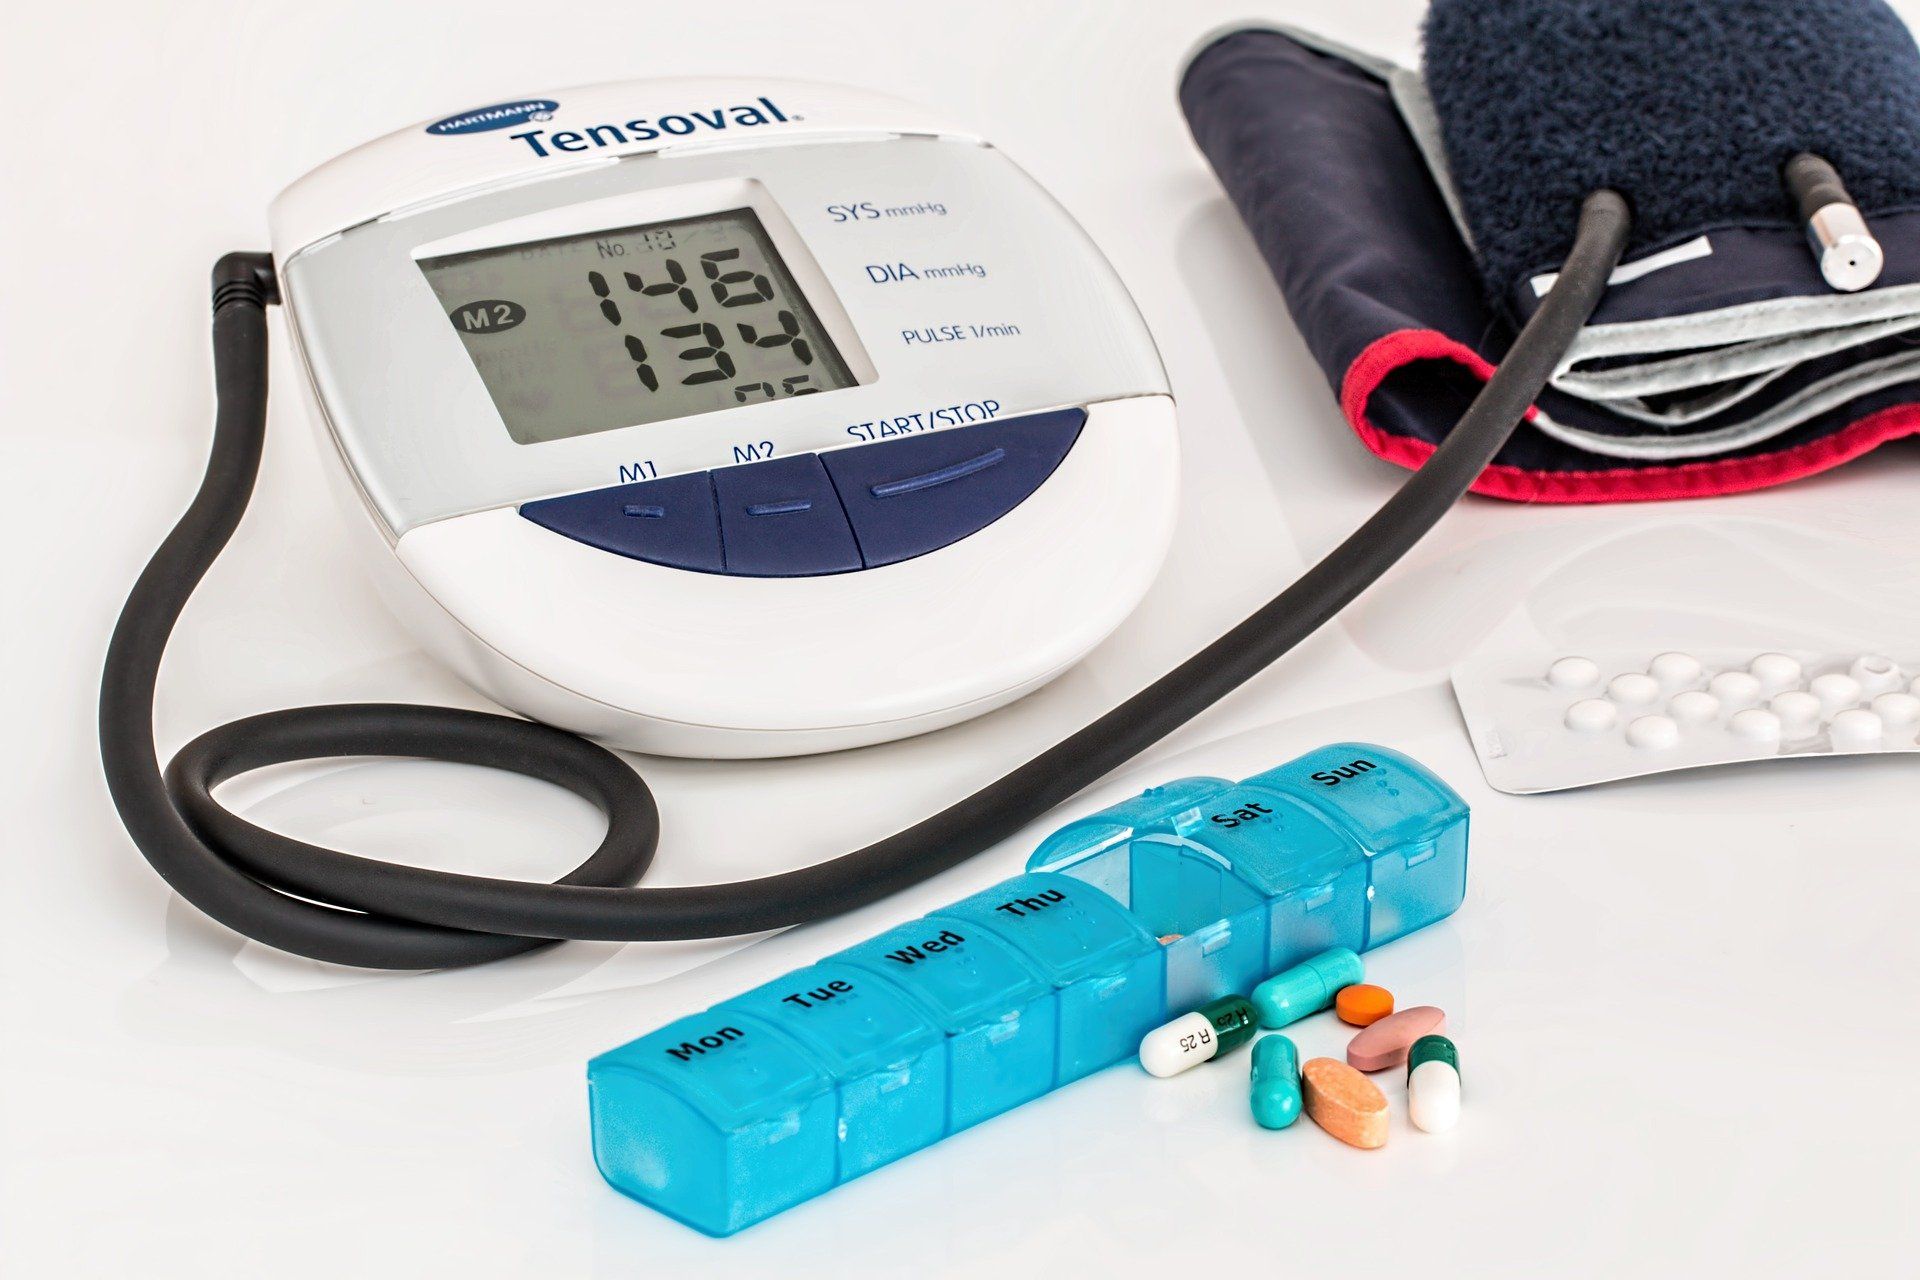 Hypertension treatment includes regular home checking of blood pressure with digital blood pressure monitors.